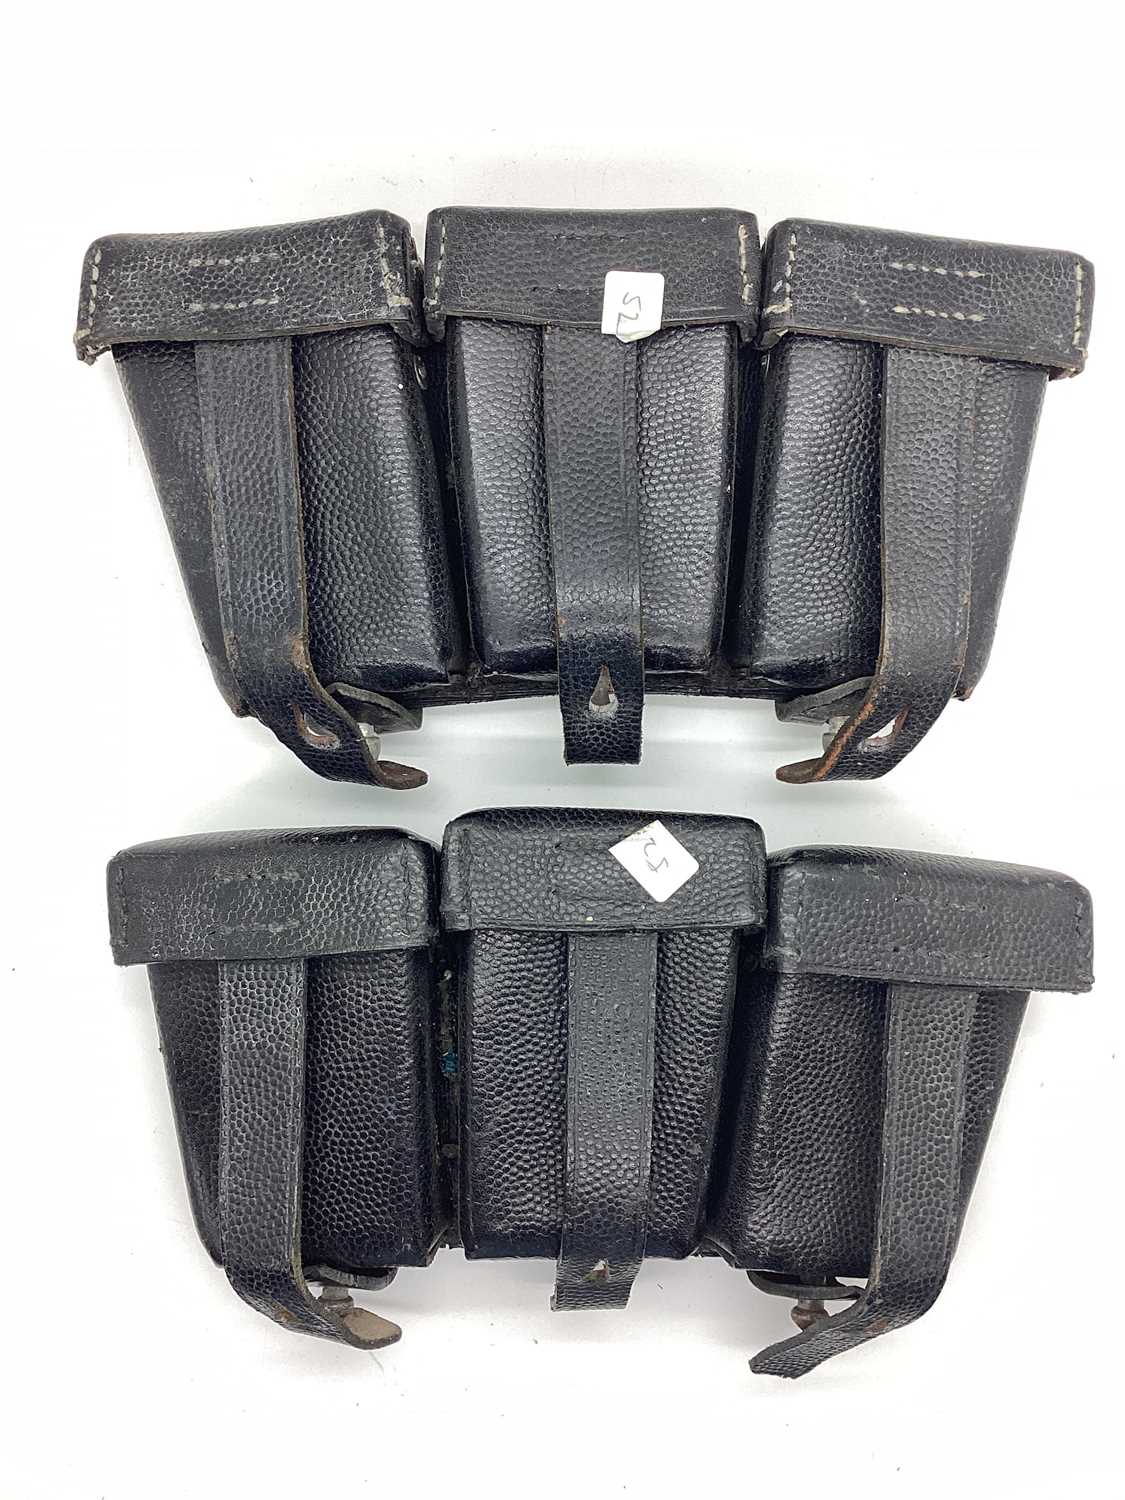 WW2 German Army K98 leather ammunition pouches (2). Due to the nature of these items we politely